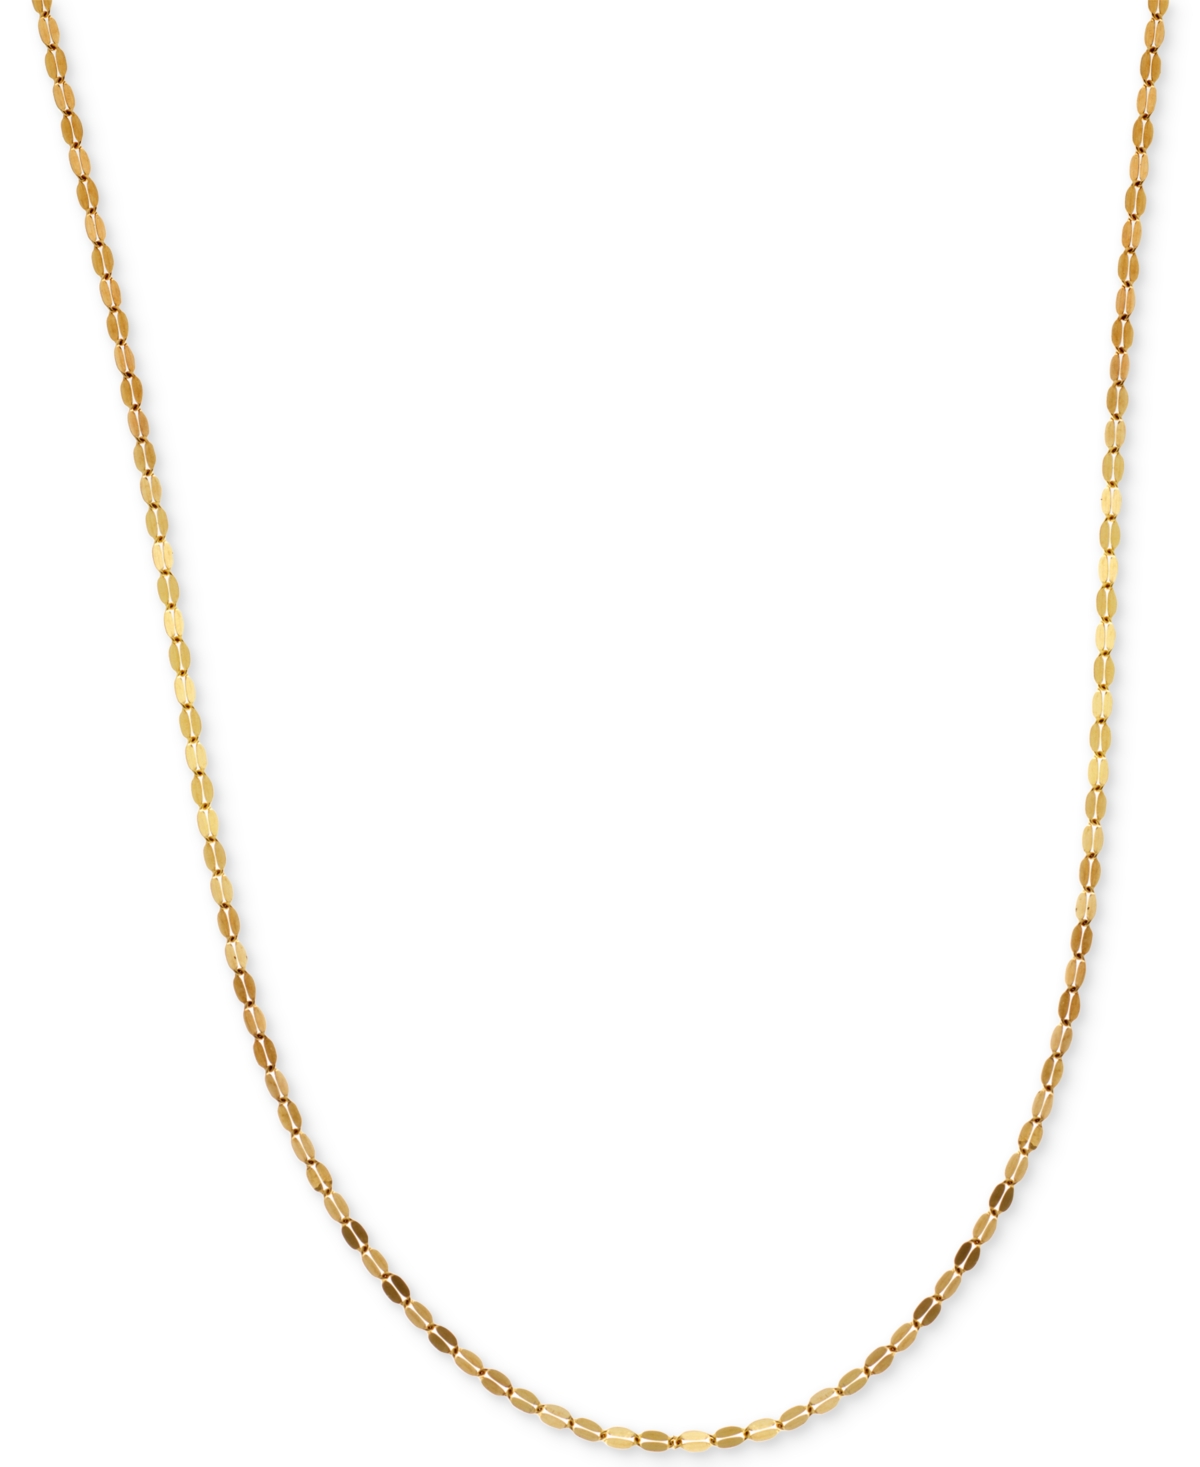 16" Polished Fancy Link Chain Necklace (1-1/2mm) in 14k Gold - Gold